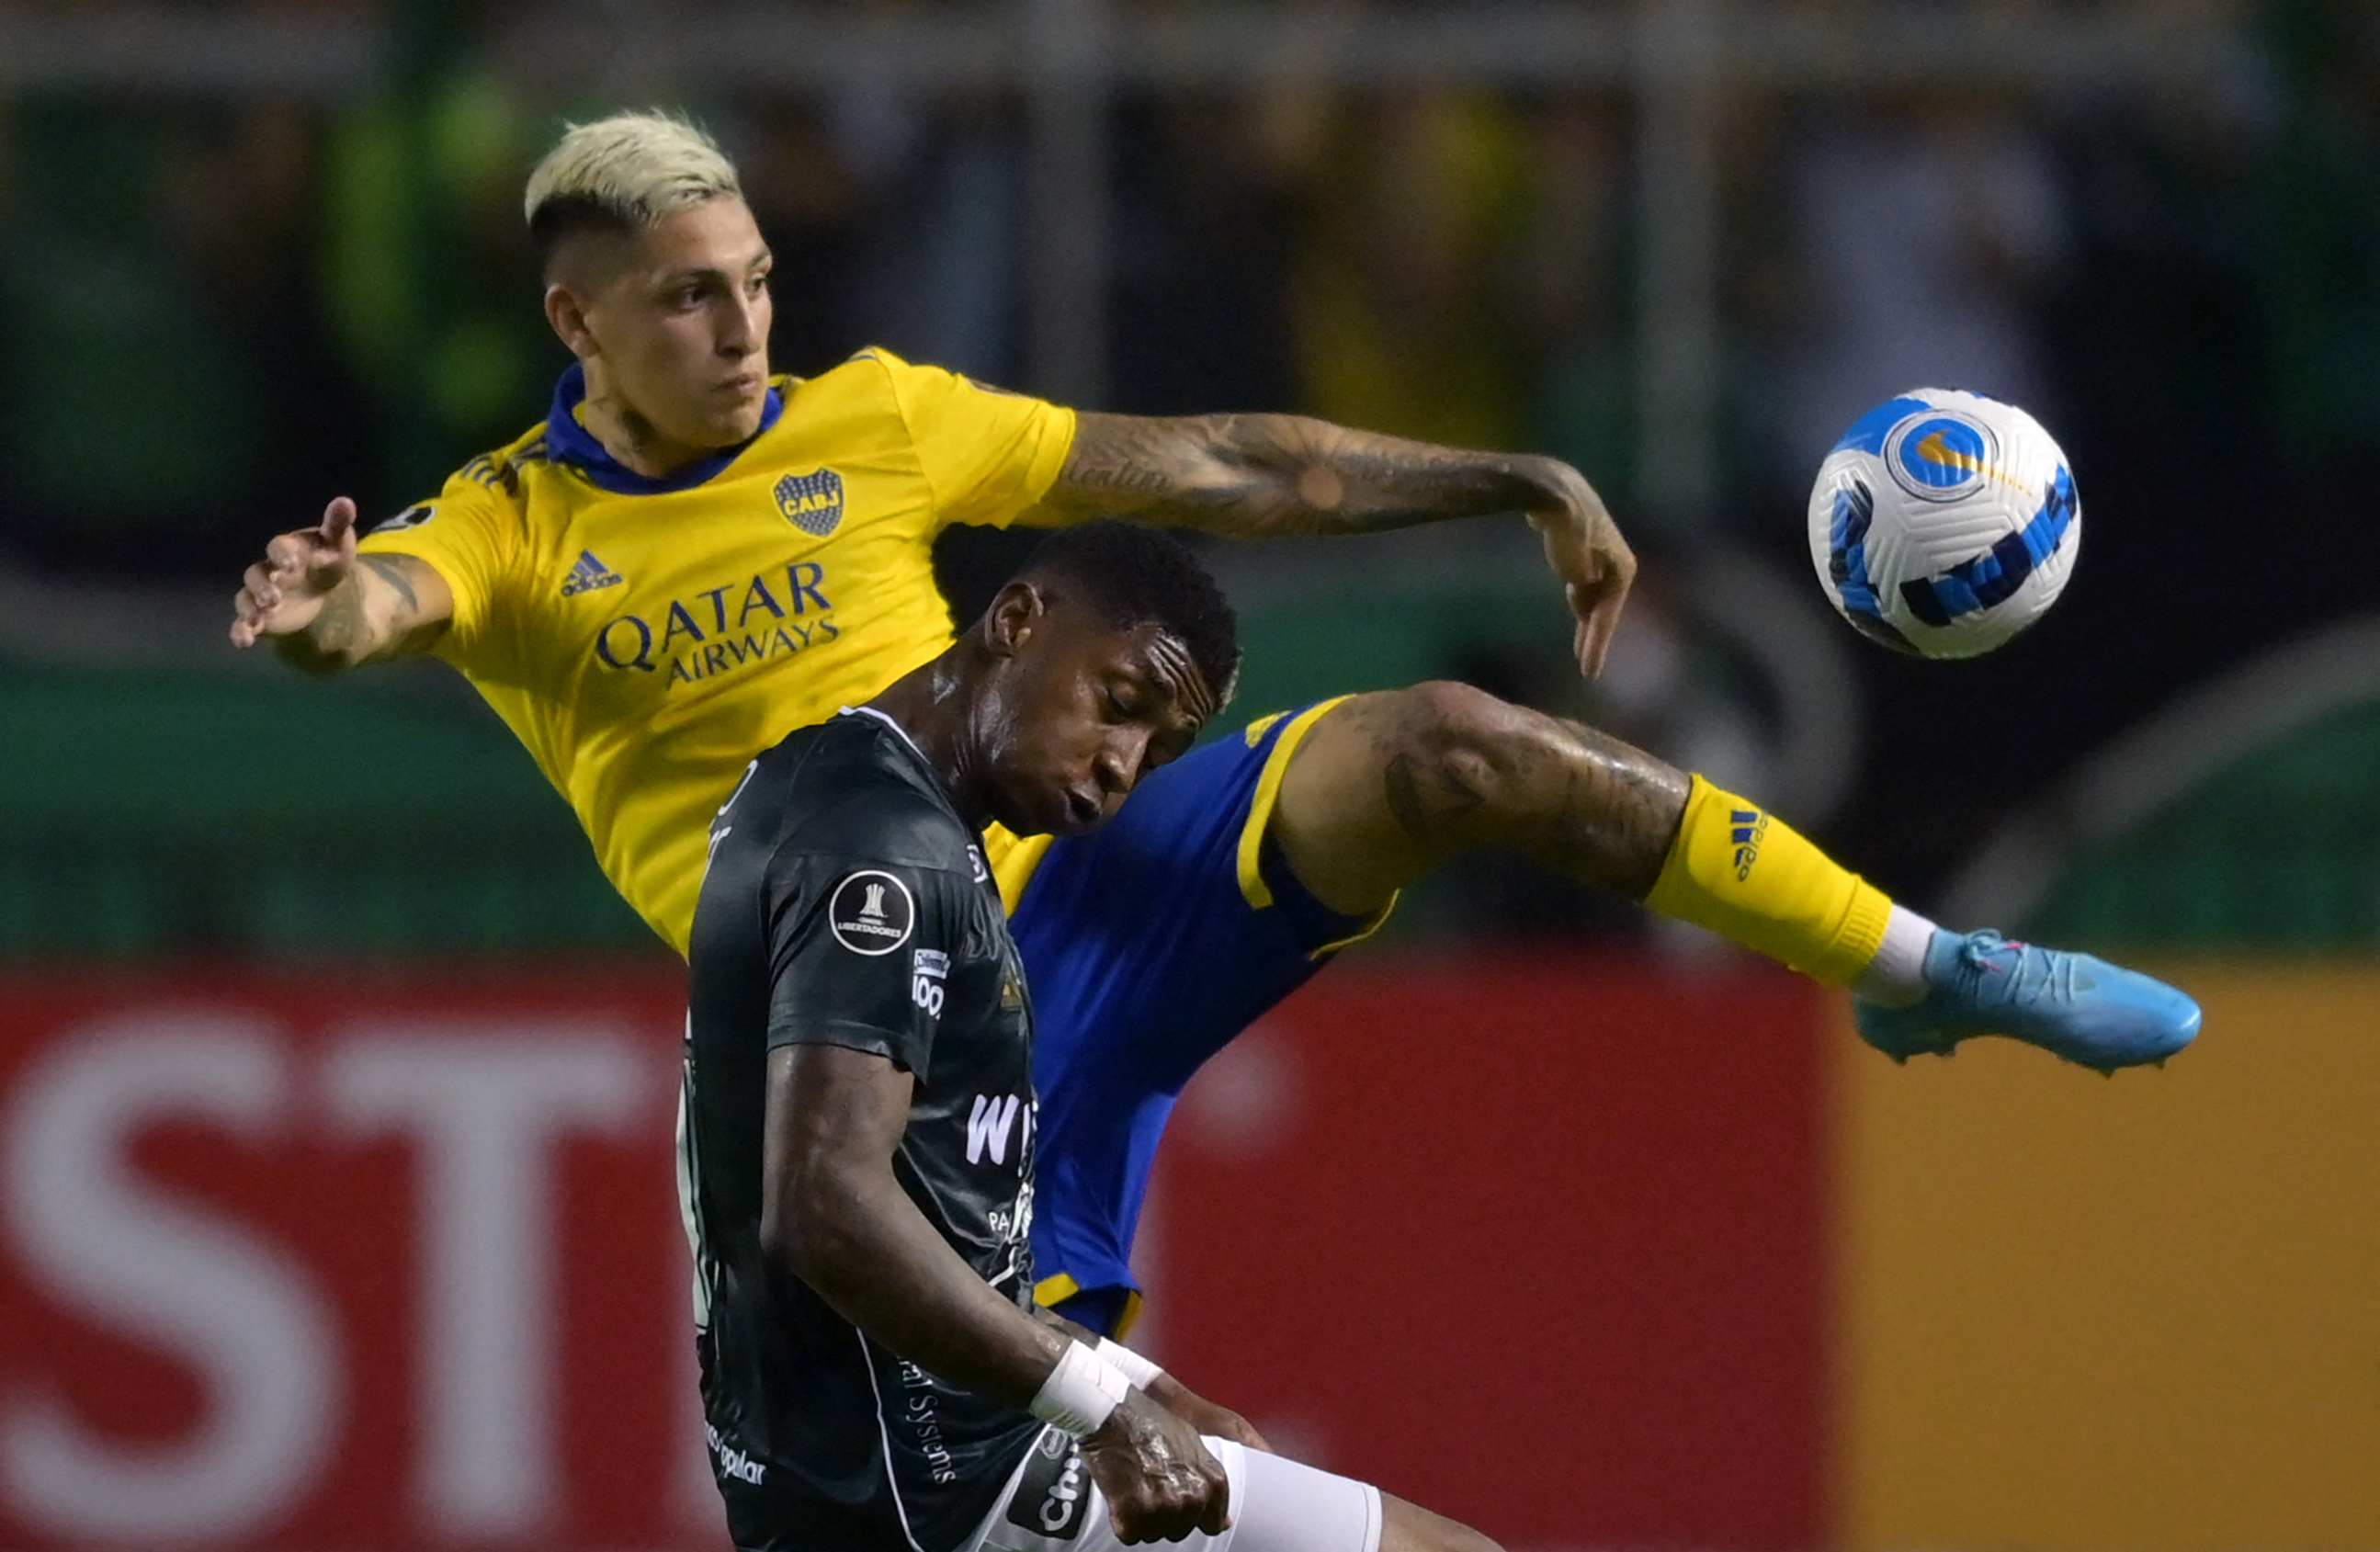 Colombia's Deportivo Cali Yony González and Argentina's Boca Juniors Gaston Avila (back) vie for the ball during their Copa Libertadores group stage first leg football match at the Deportivo Cali Stadium in Palmira, near Cali, Colombia, on April 5, 2022. (Photo by Luis ROBAYO / AFP)